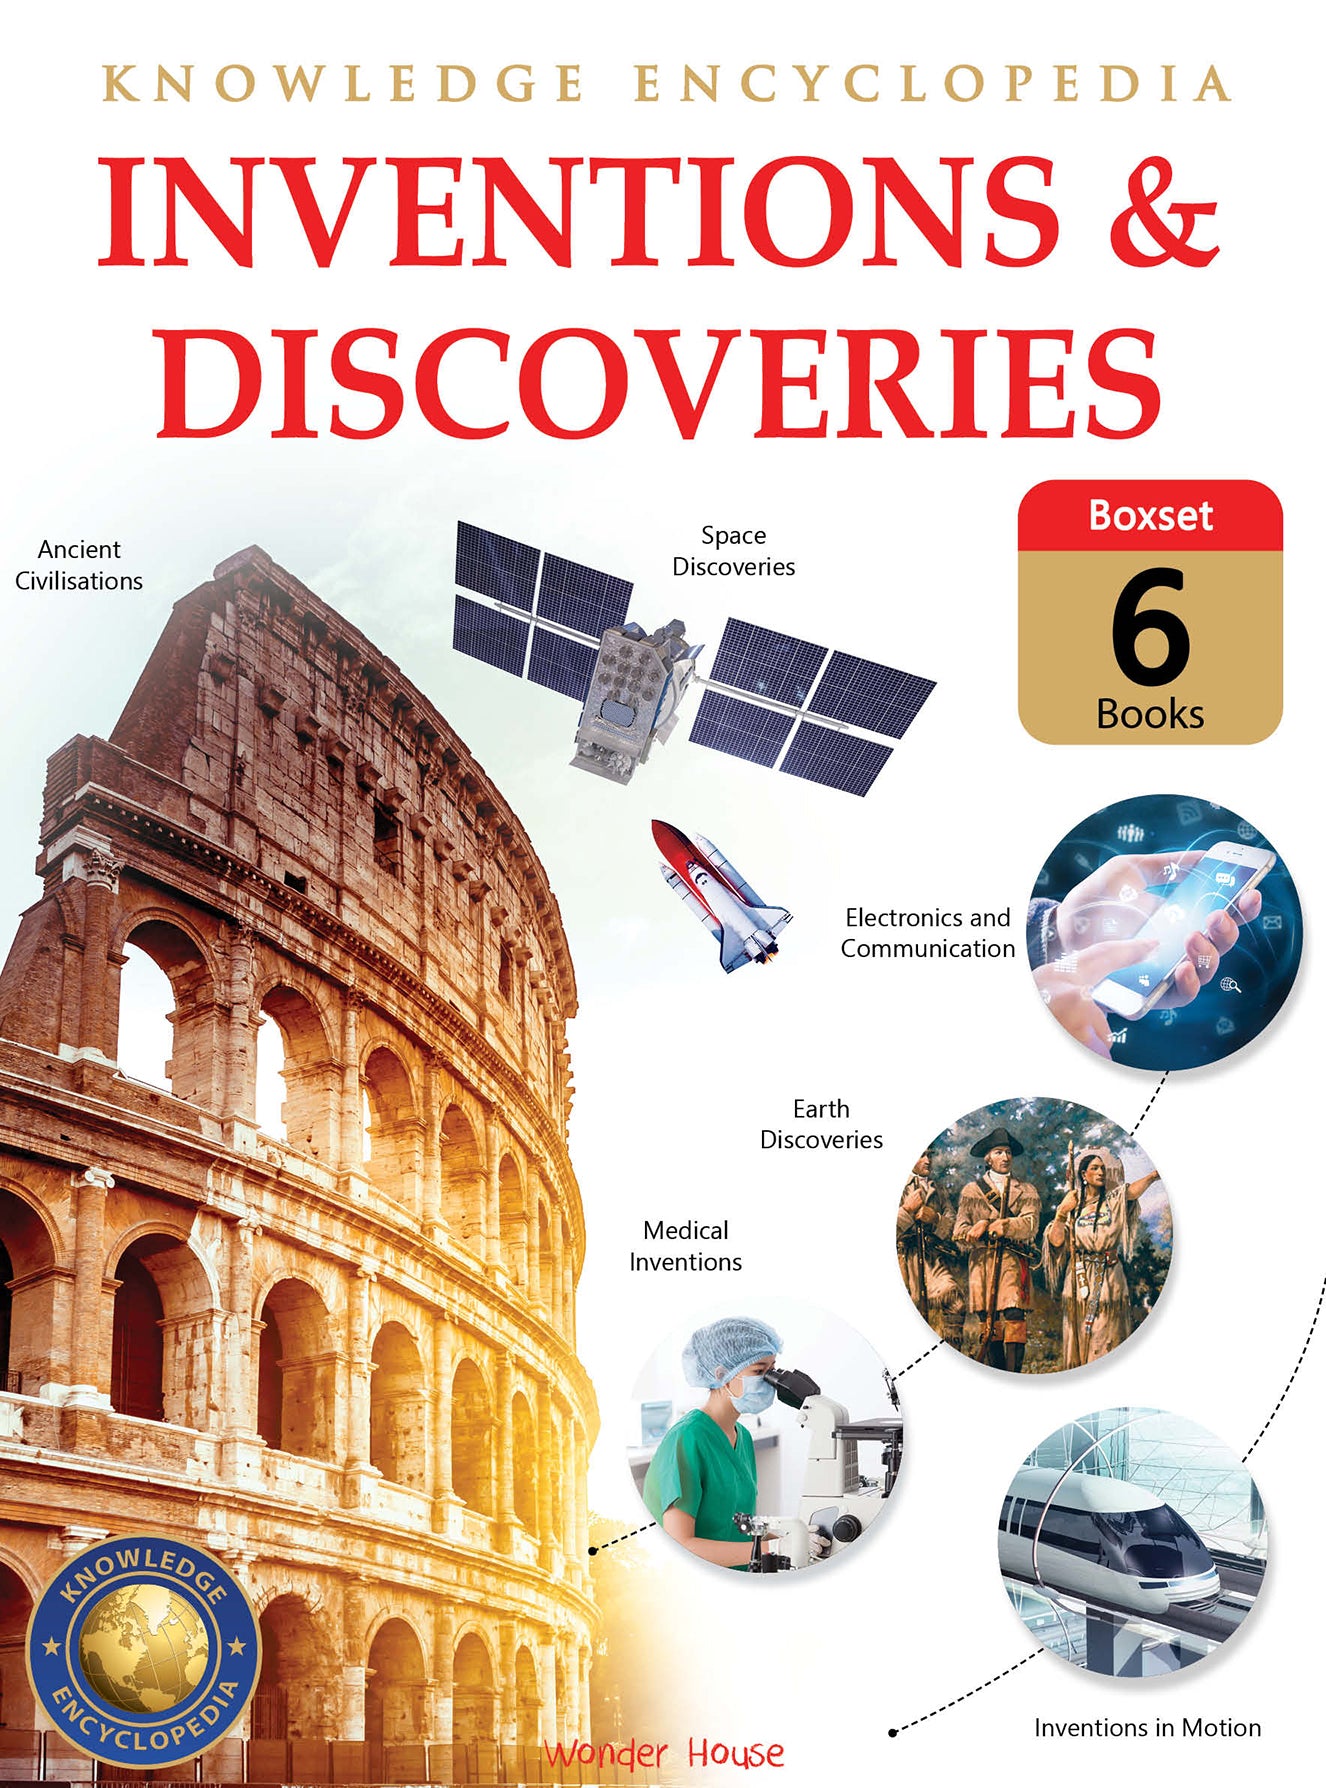 Inventions & Discoveries - Collection of 6 Books: Knowledge Encyclopedia For Children